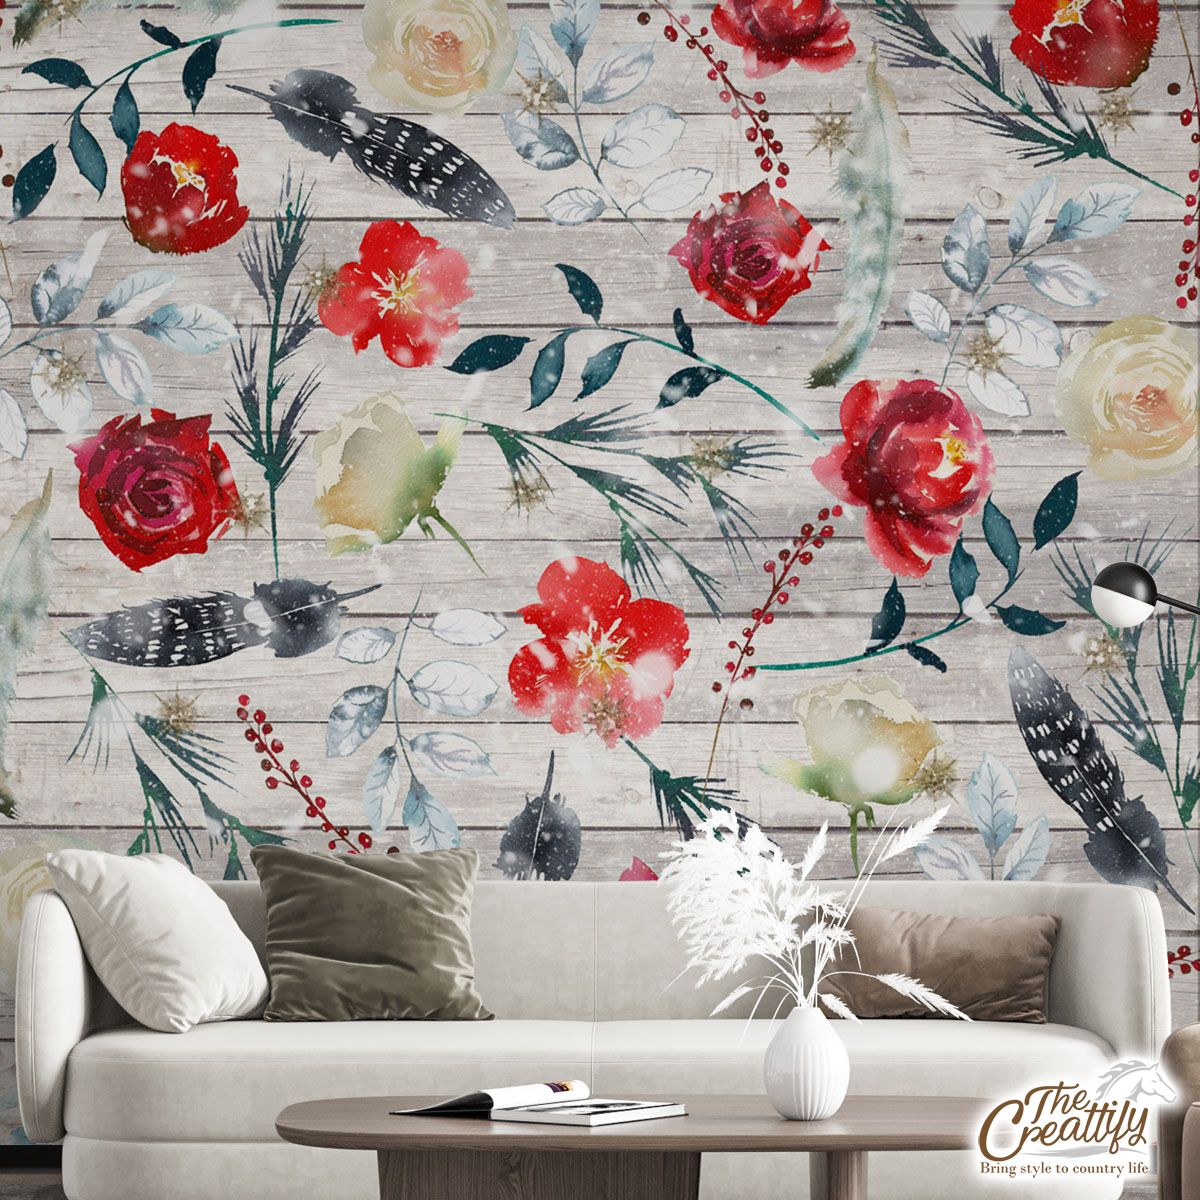 Florals With Red Berries Pattern Wall Mural